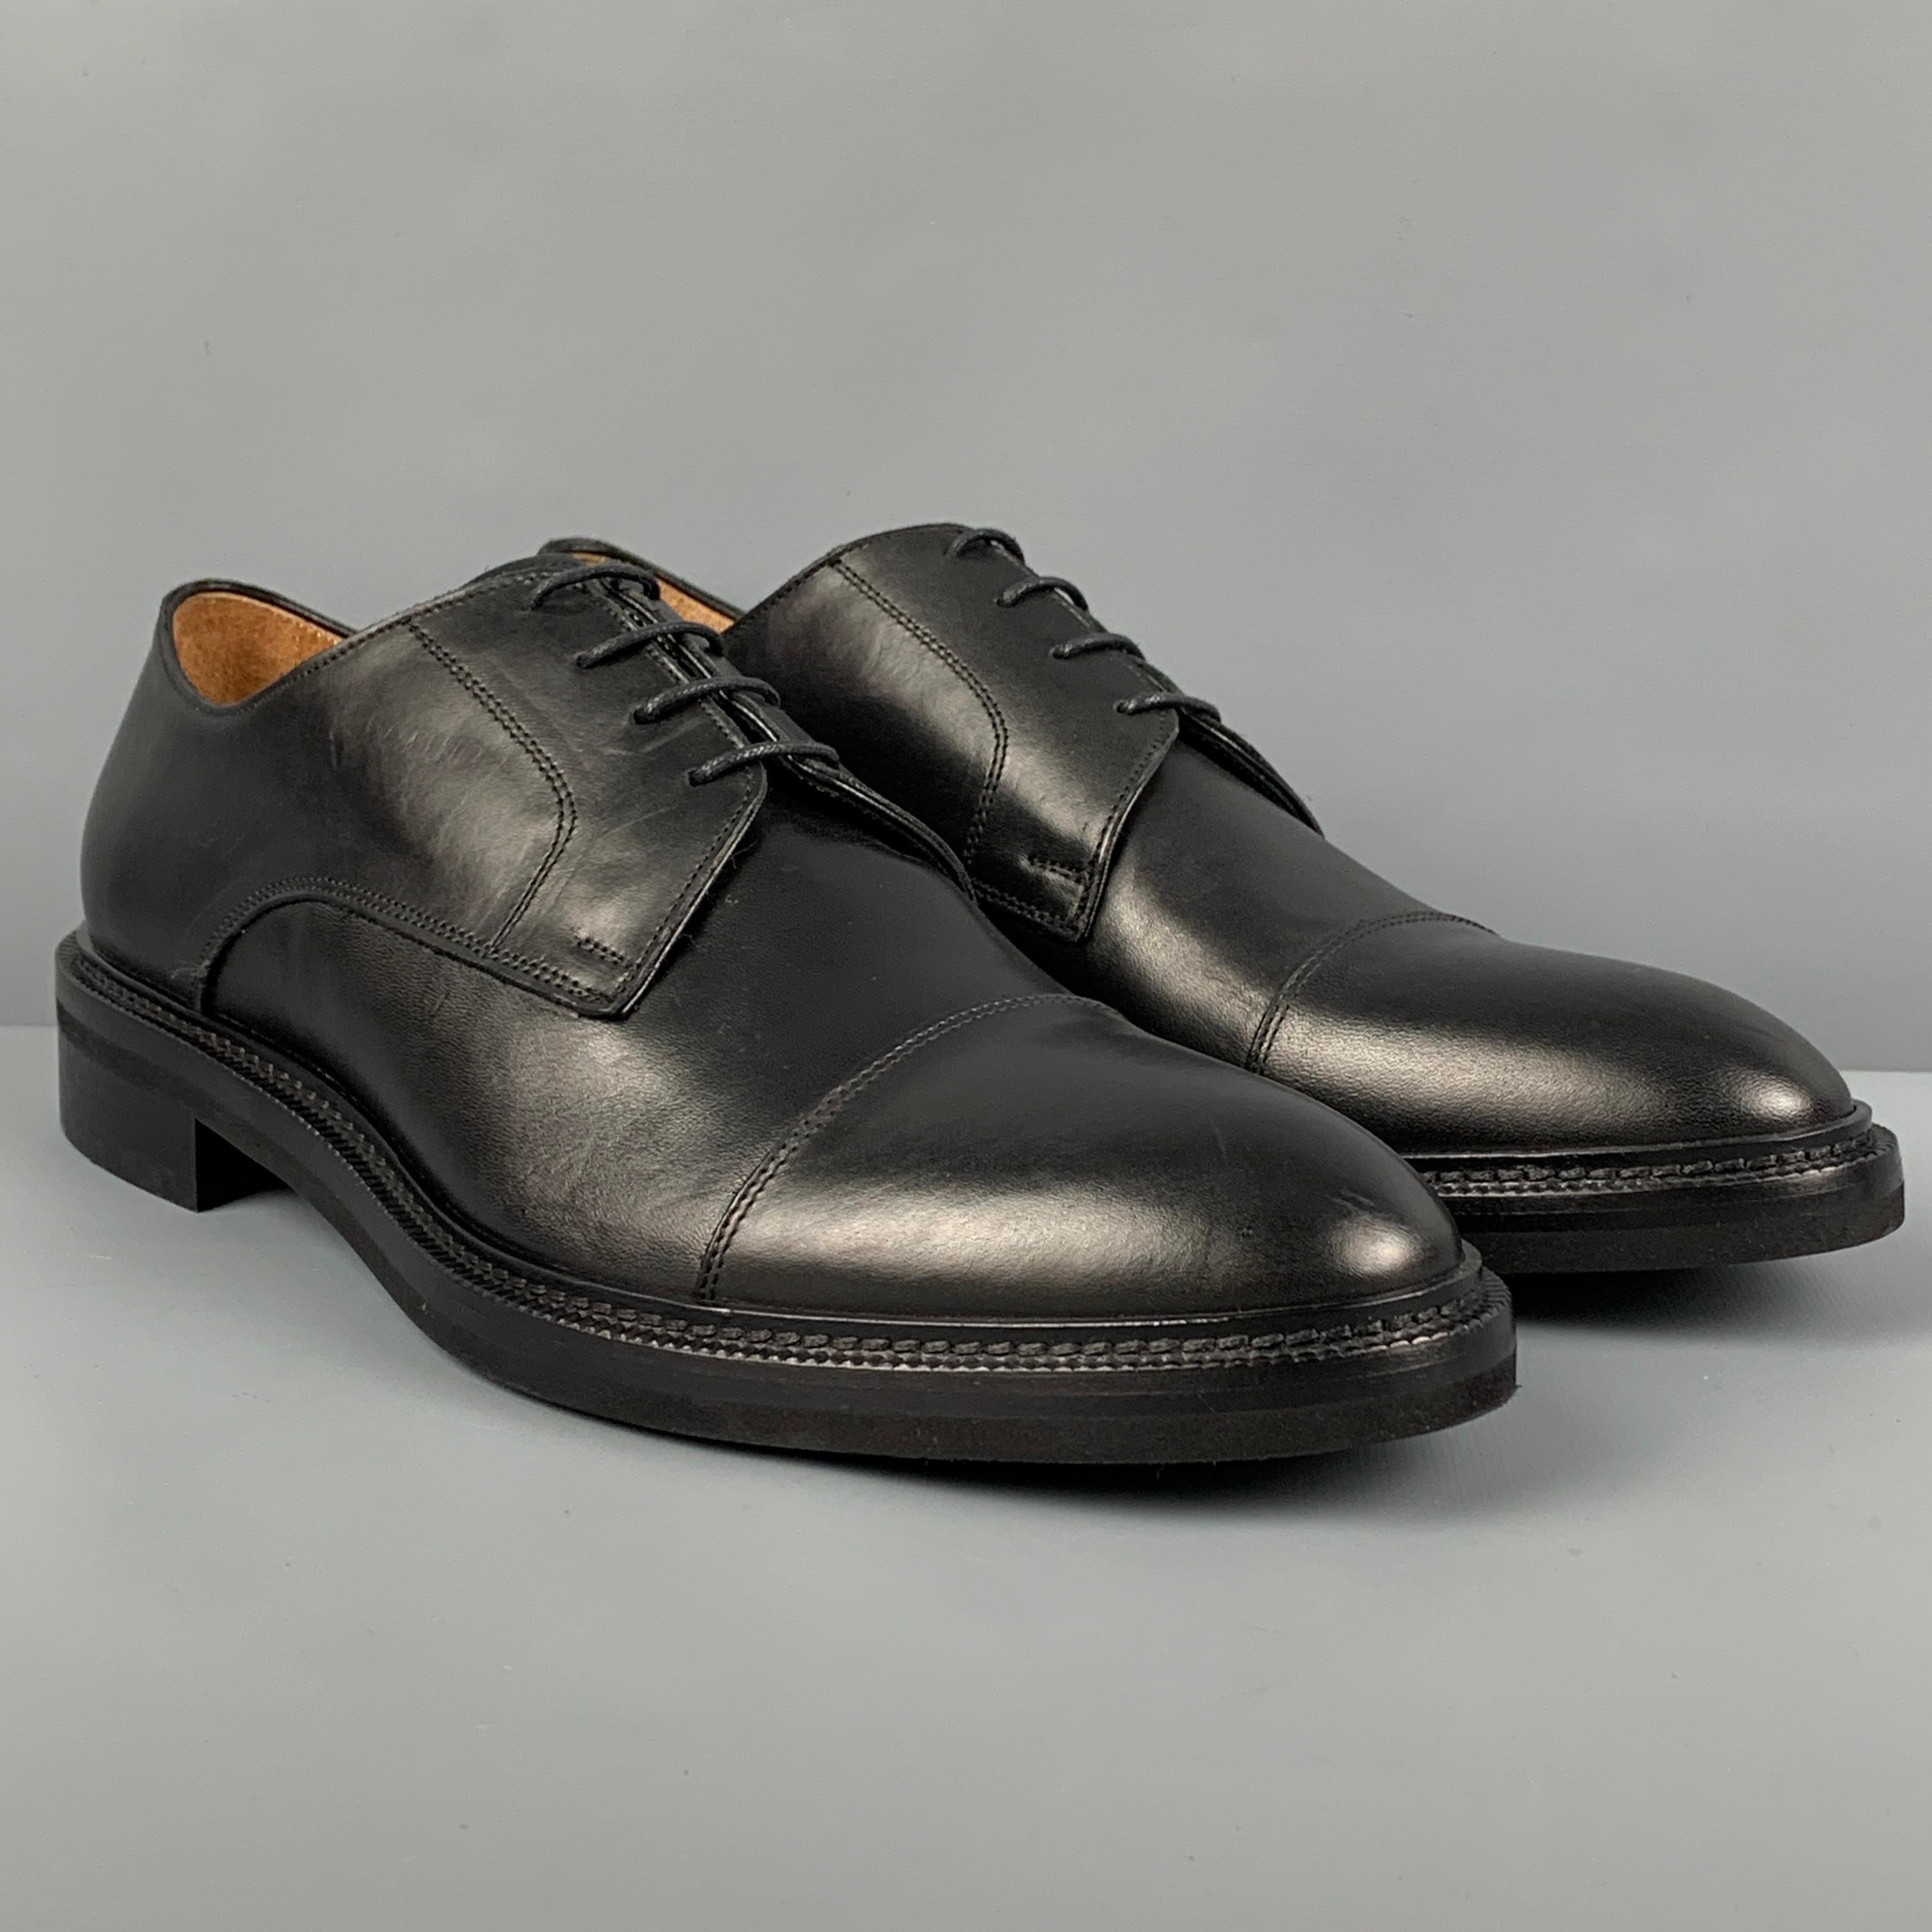 BARNEY'S NEW YORK shoes comes in a black leather featuring a cap toe and a lace up closure. Made in Italy. 

Excellent Pre-Owned Condition.
Marked: 12

Outsole: 13.25 in. x 4.5 in. 